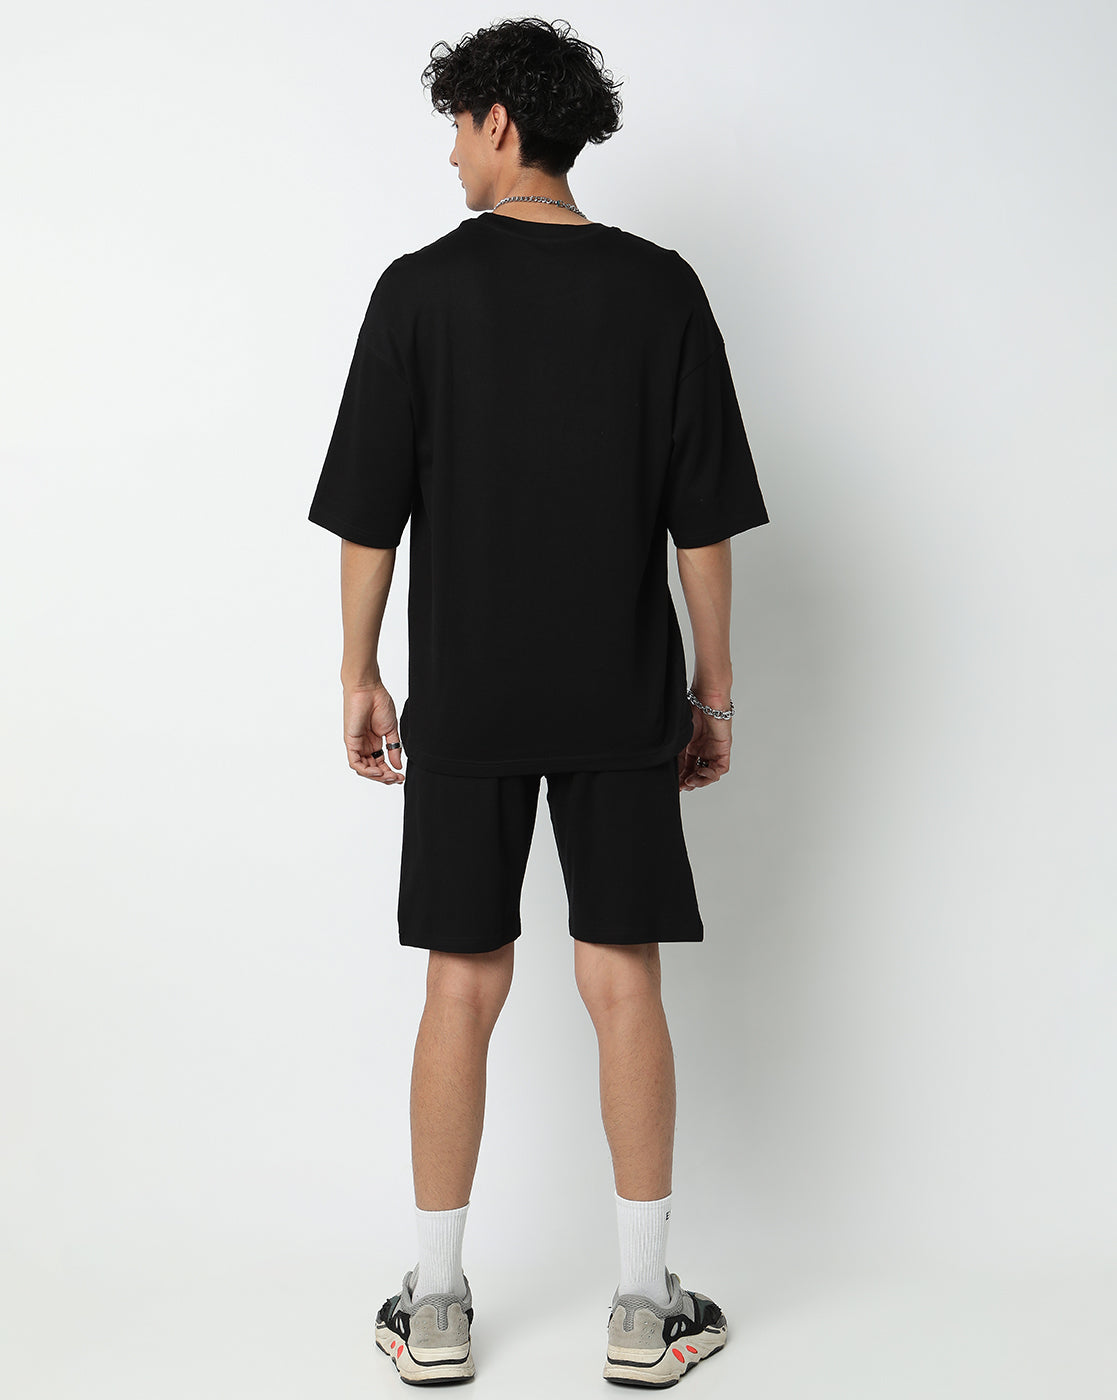 Black Chicago Graphic Printed Oversized Co-ords